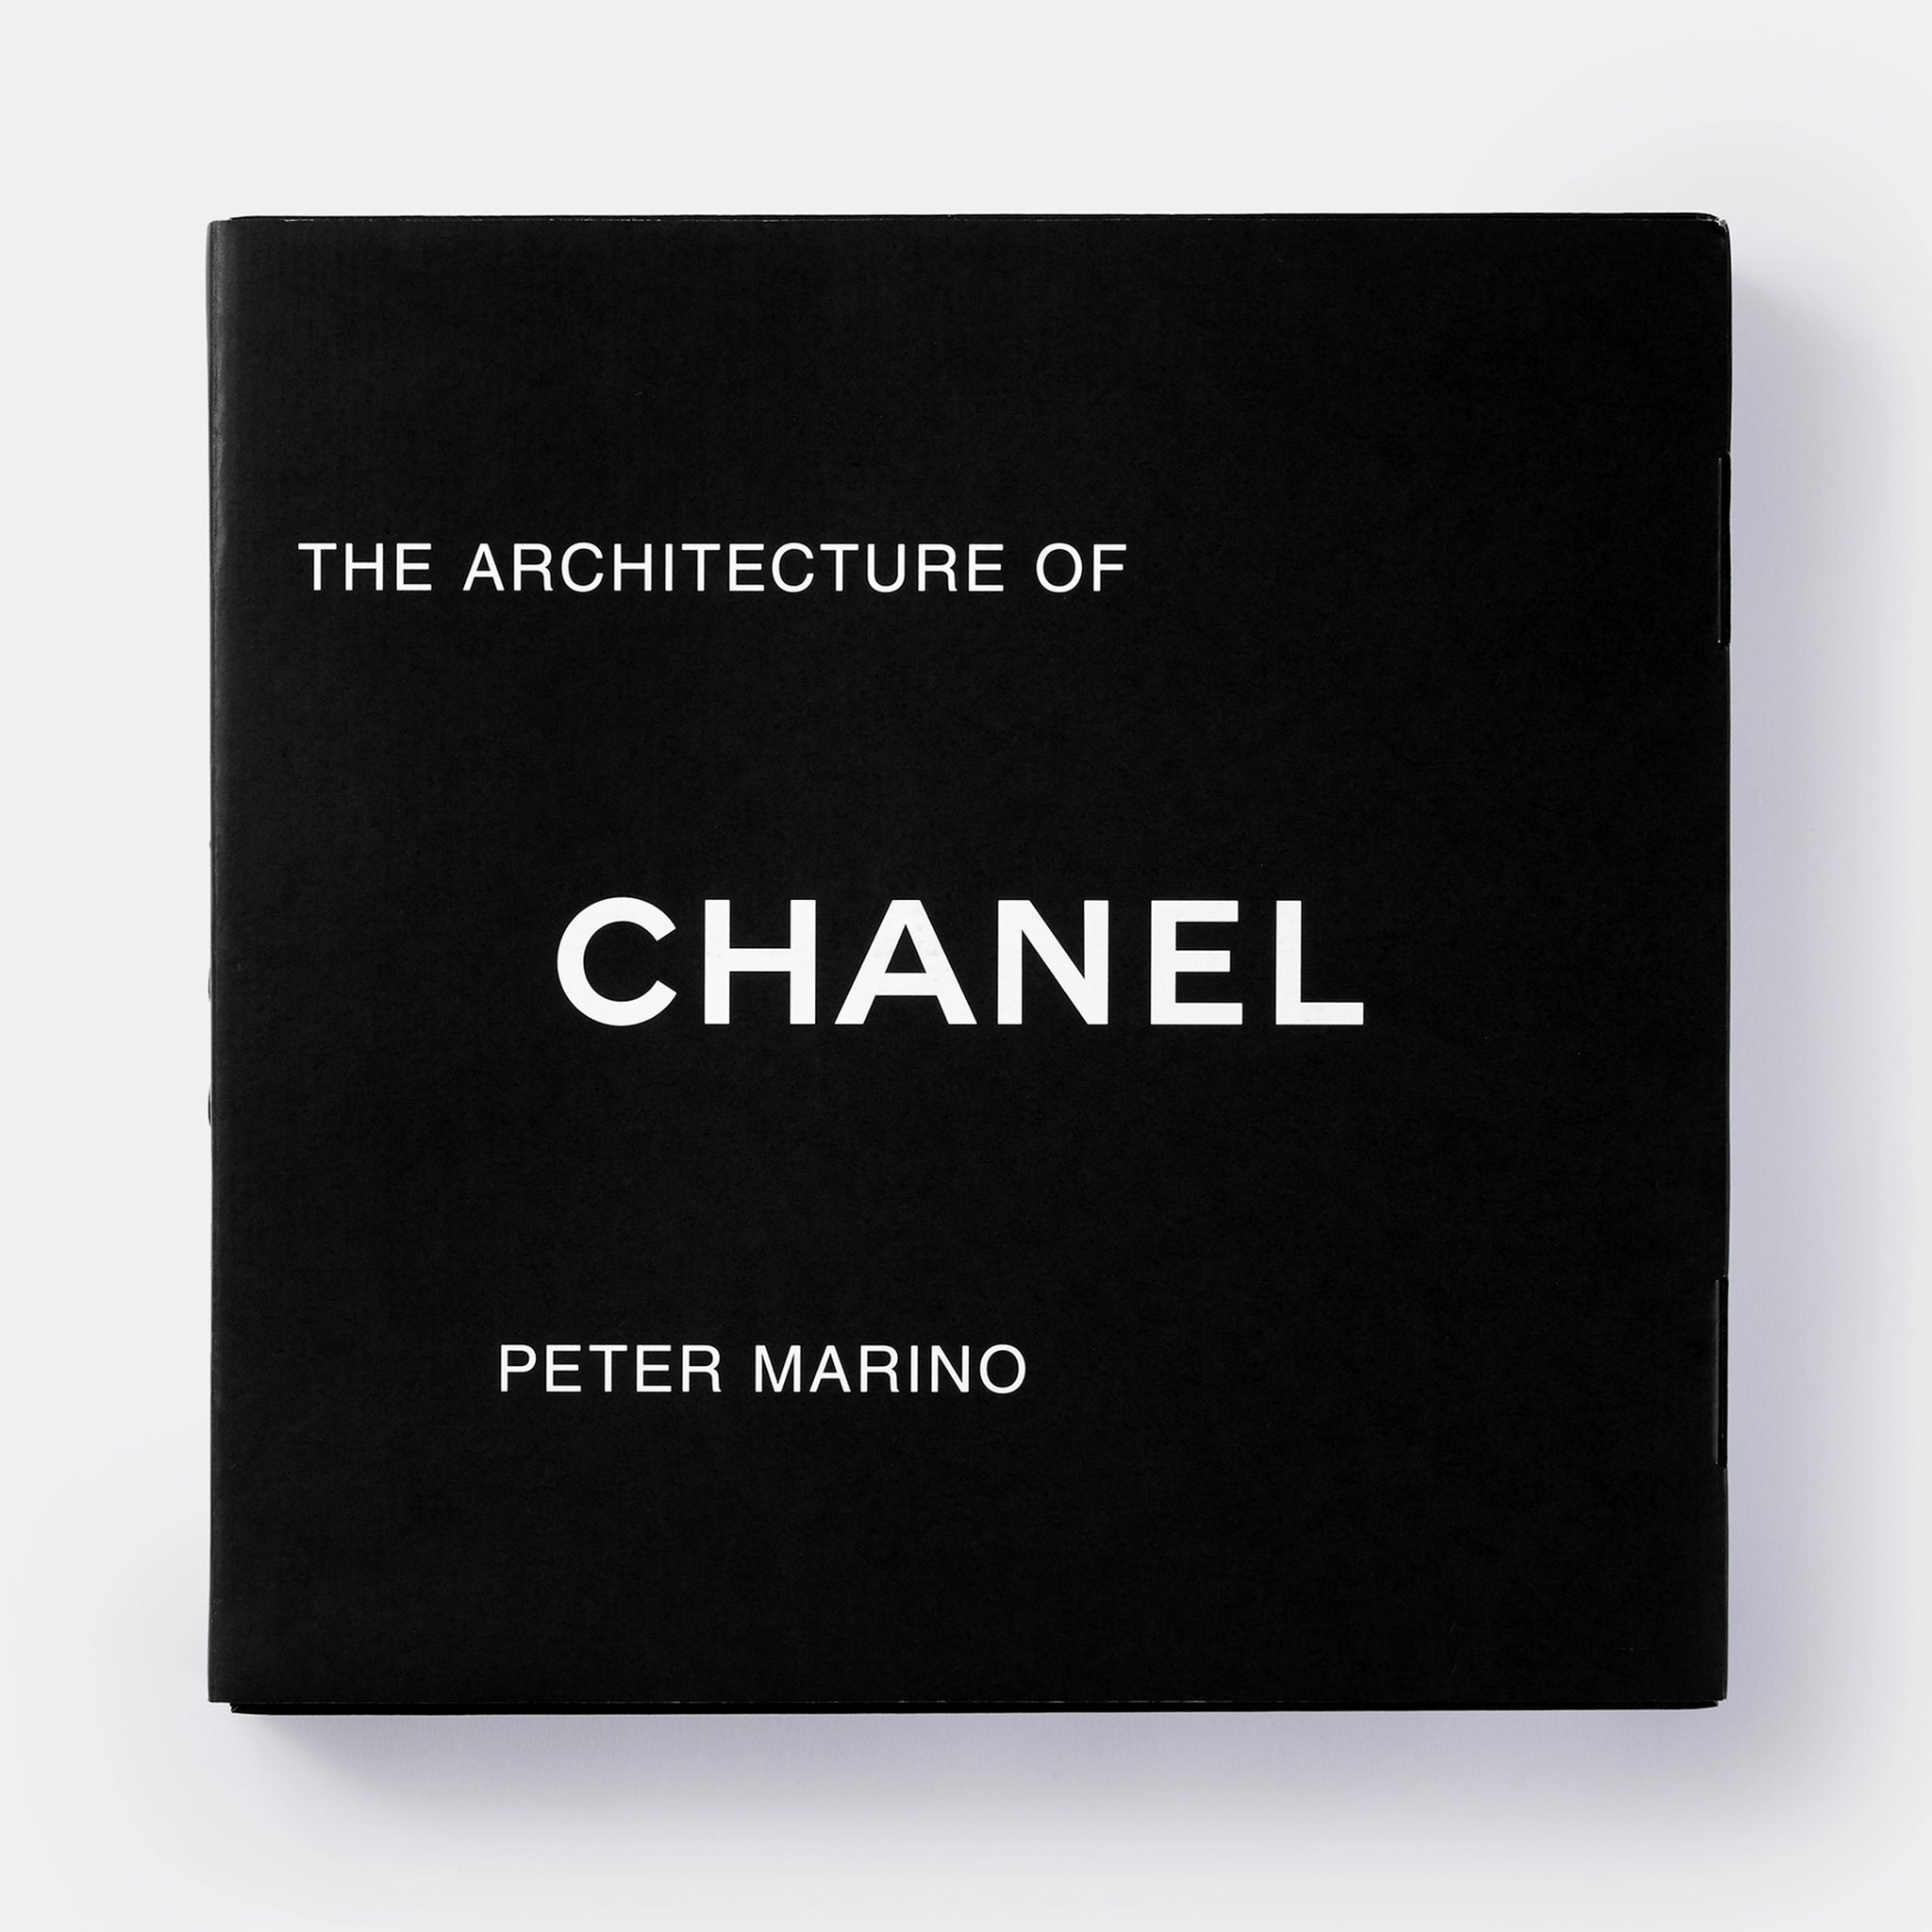 The Architecture of Chanel Peter Marino (pre-order)